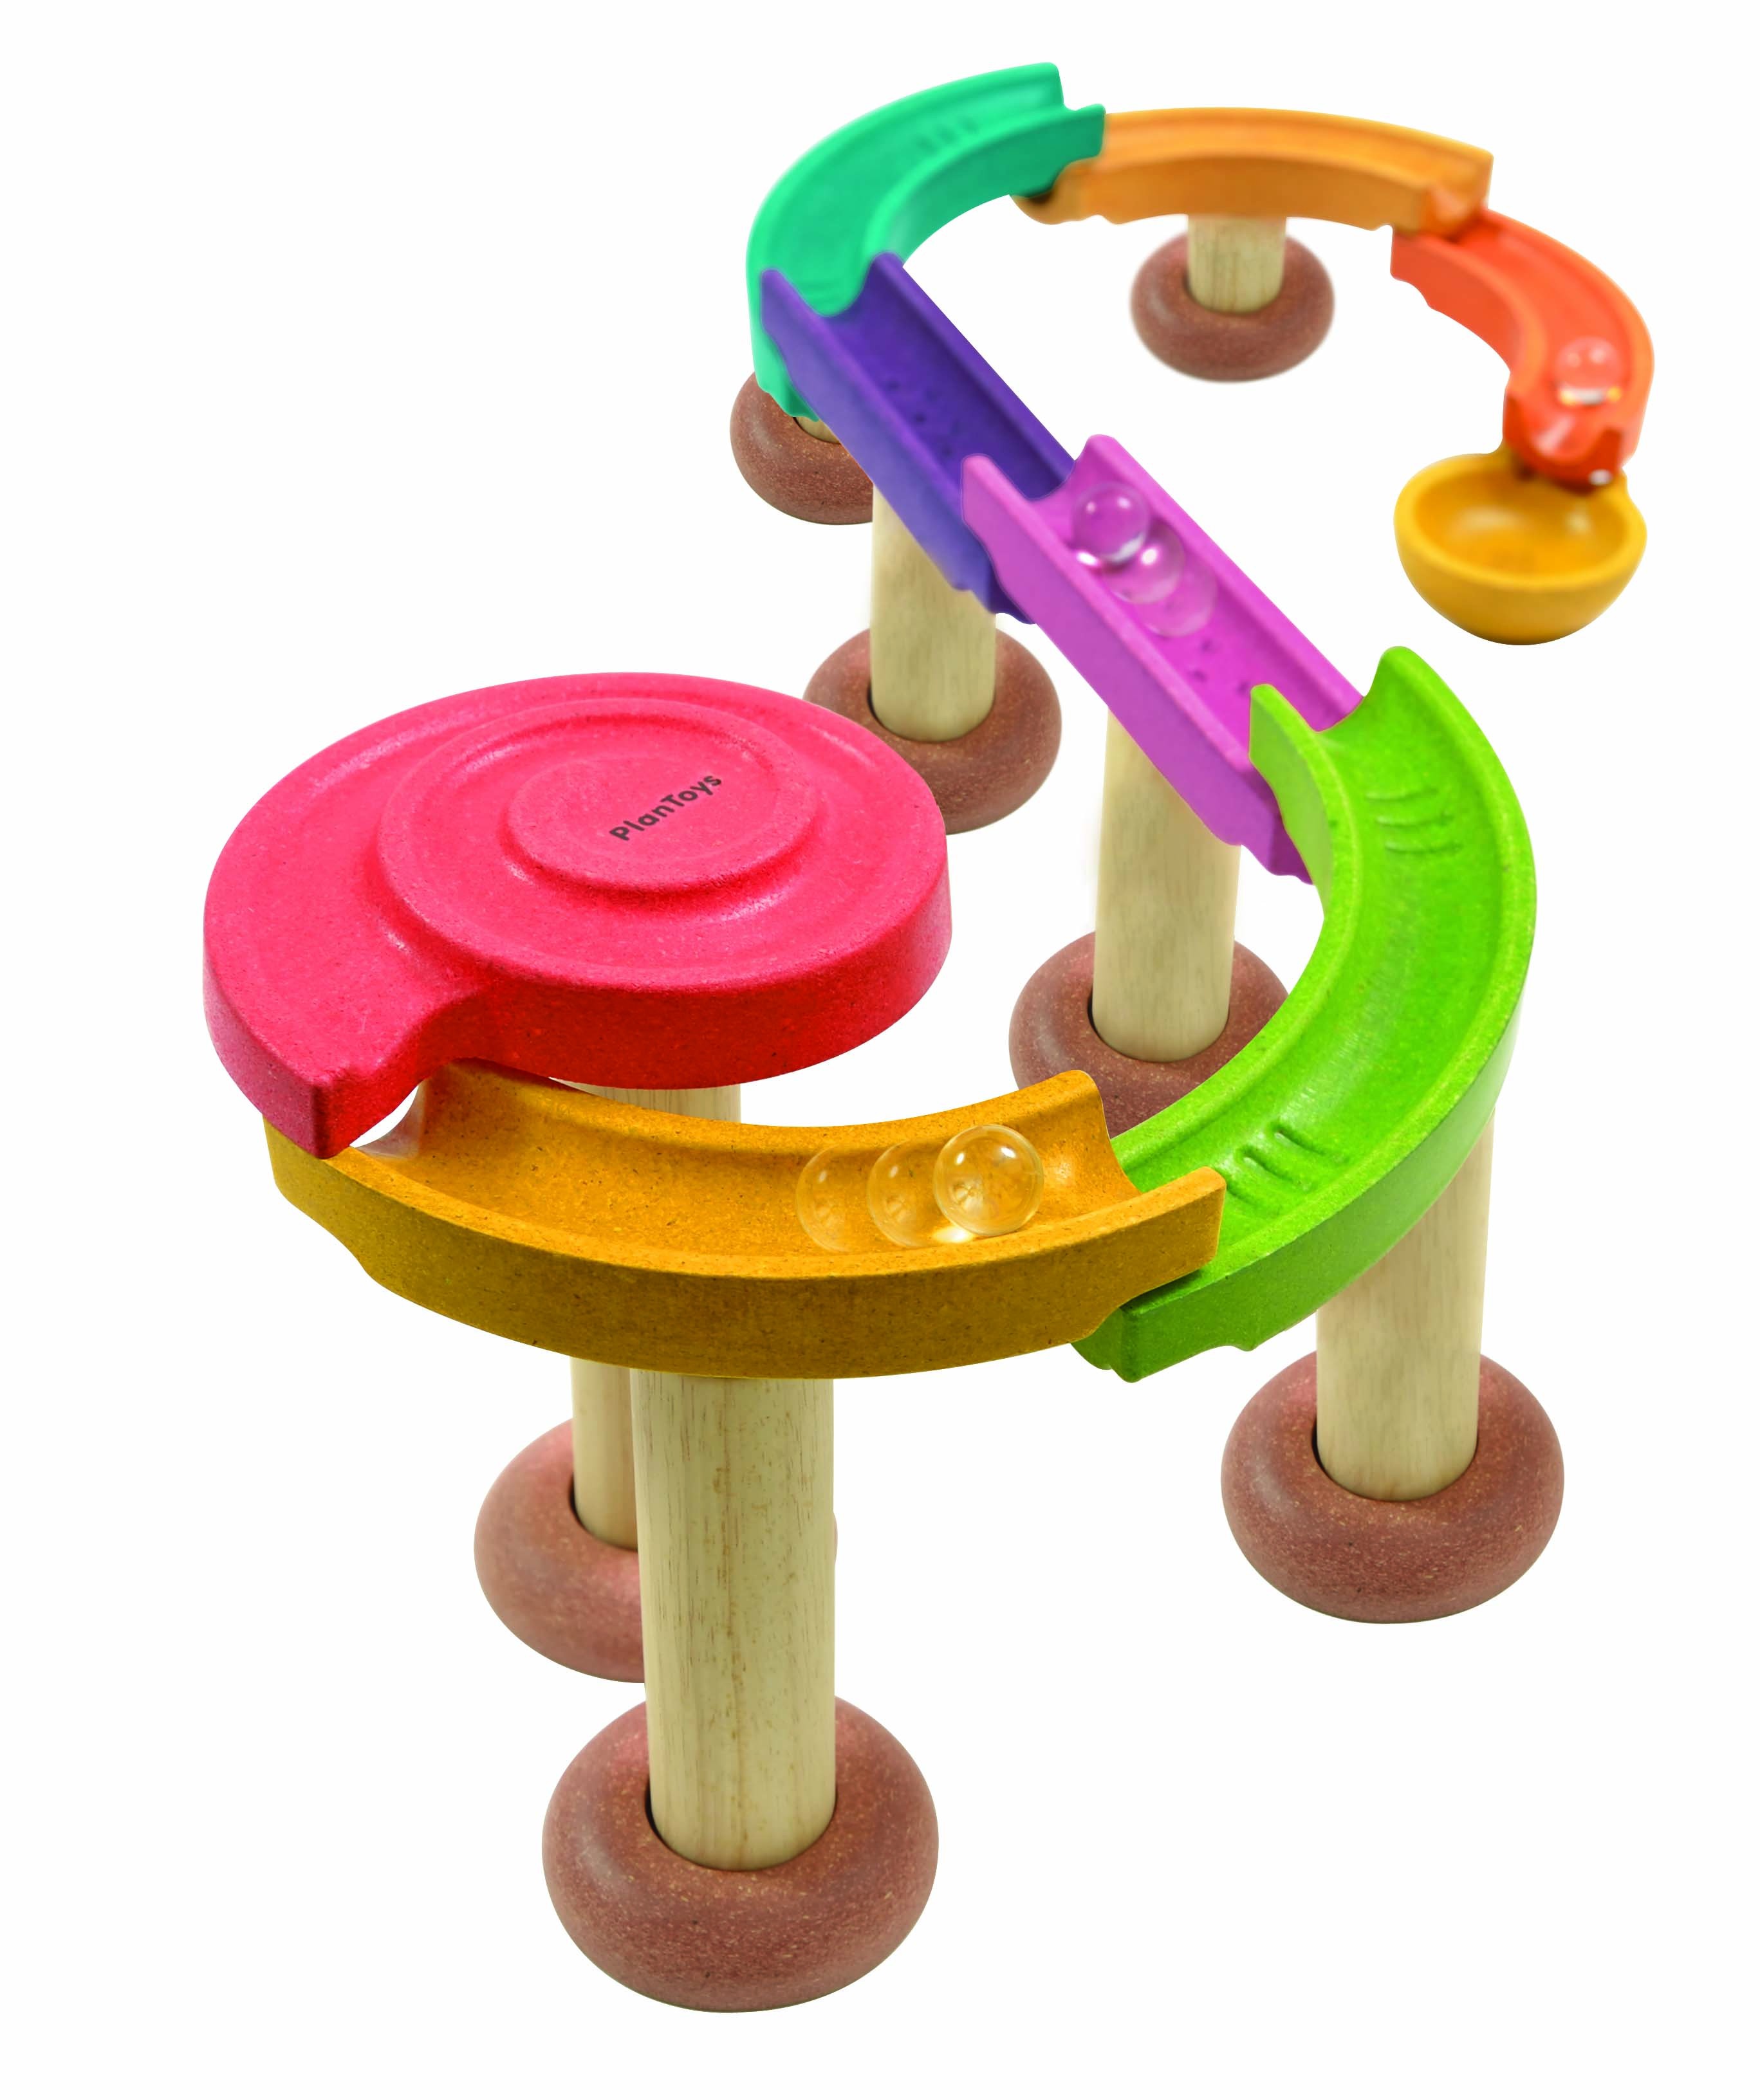 70 Piece Marble Run - House of Marbles US